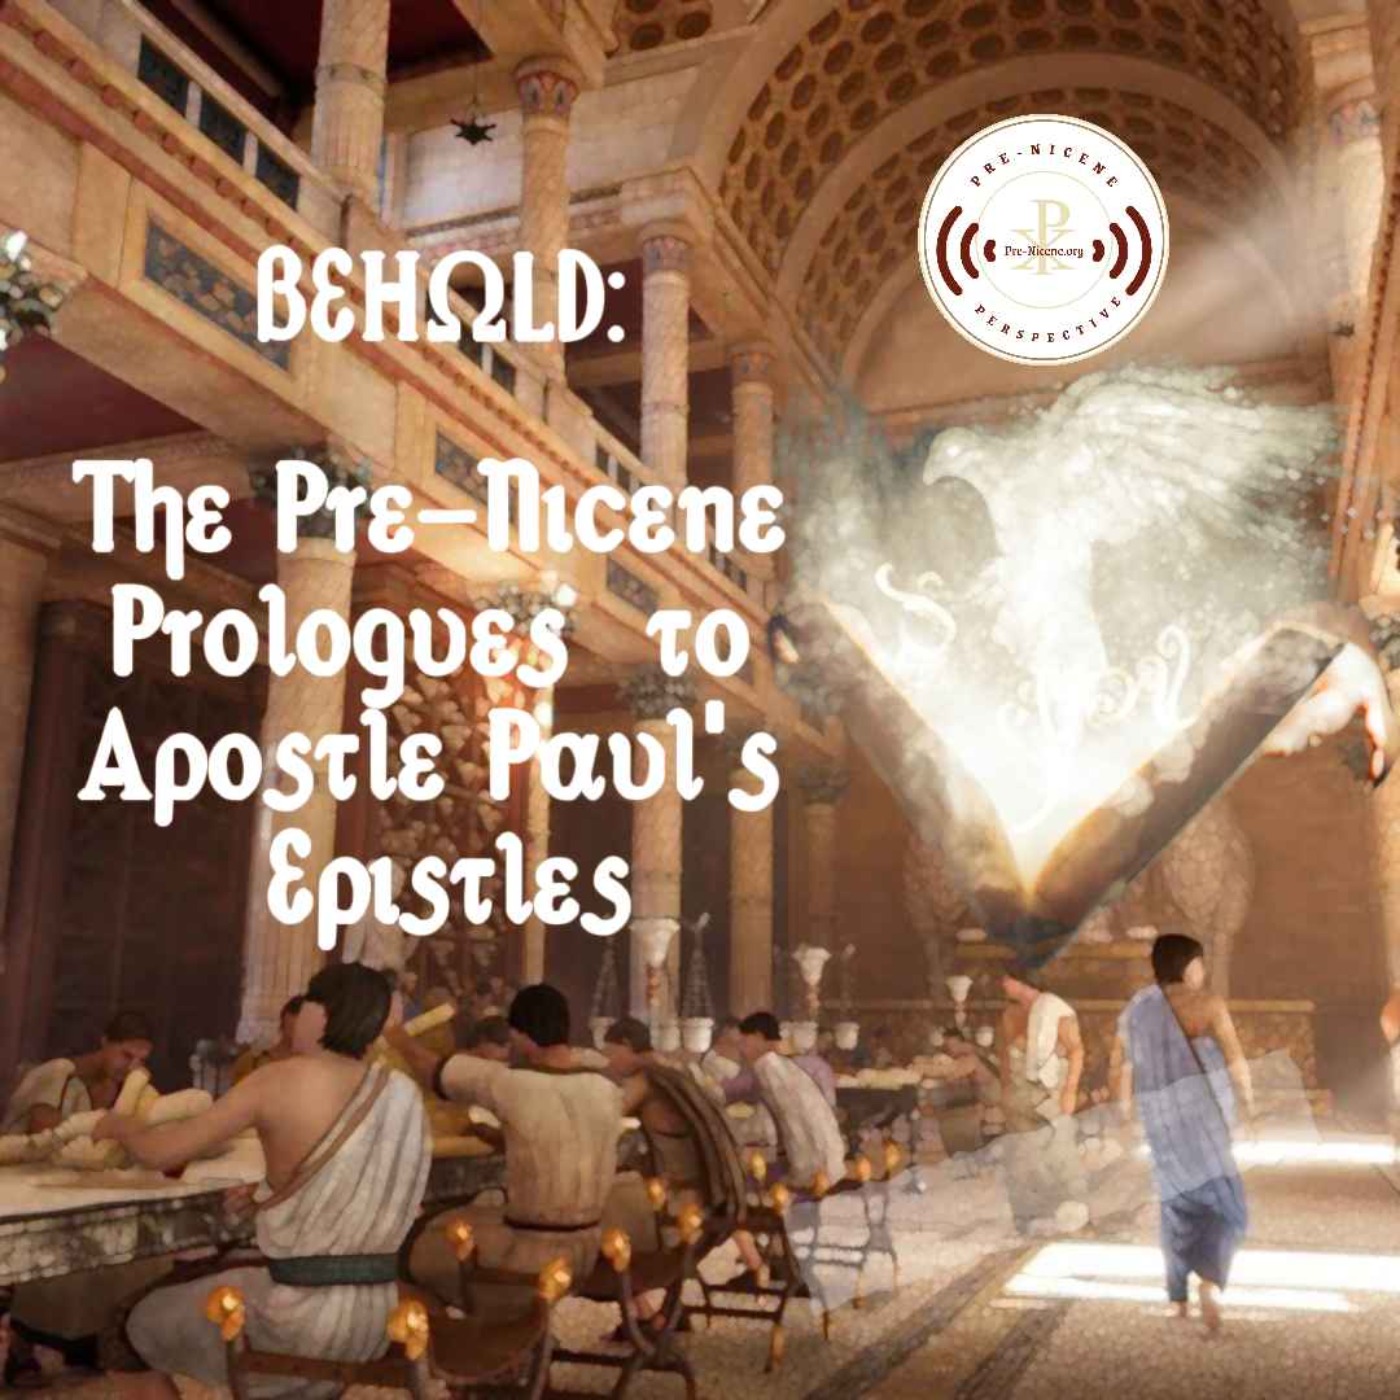 cover art for Behold: The Pre-Nicene Prologues to Apostle Paul's Epistles